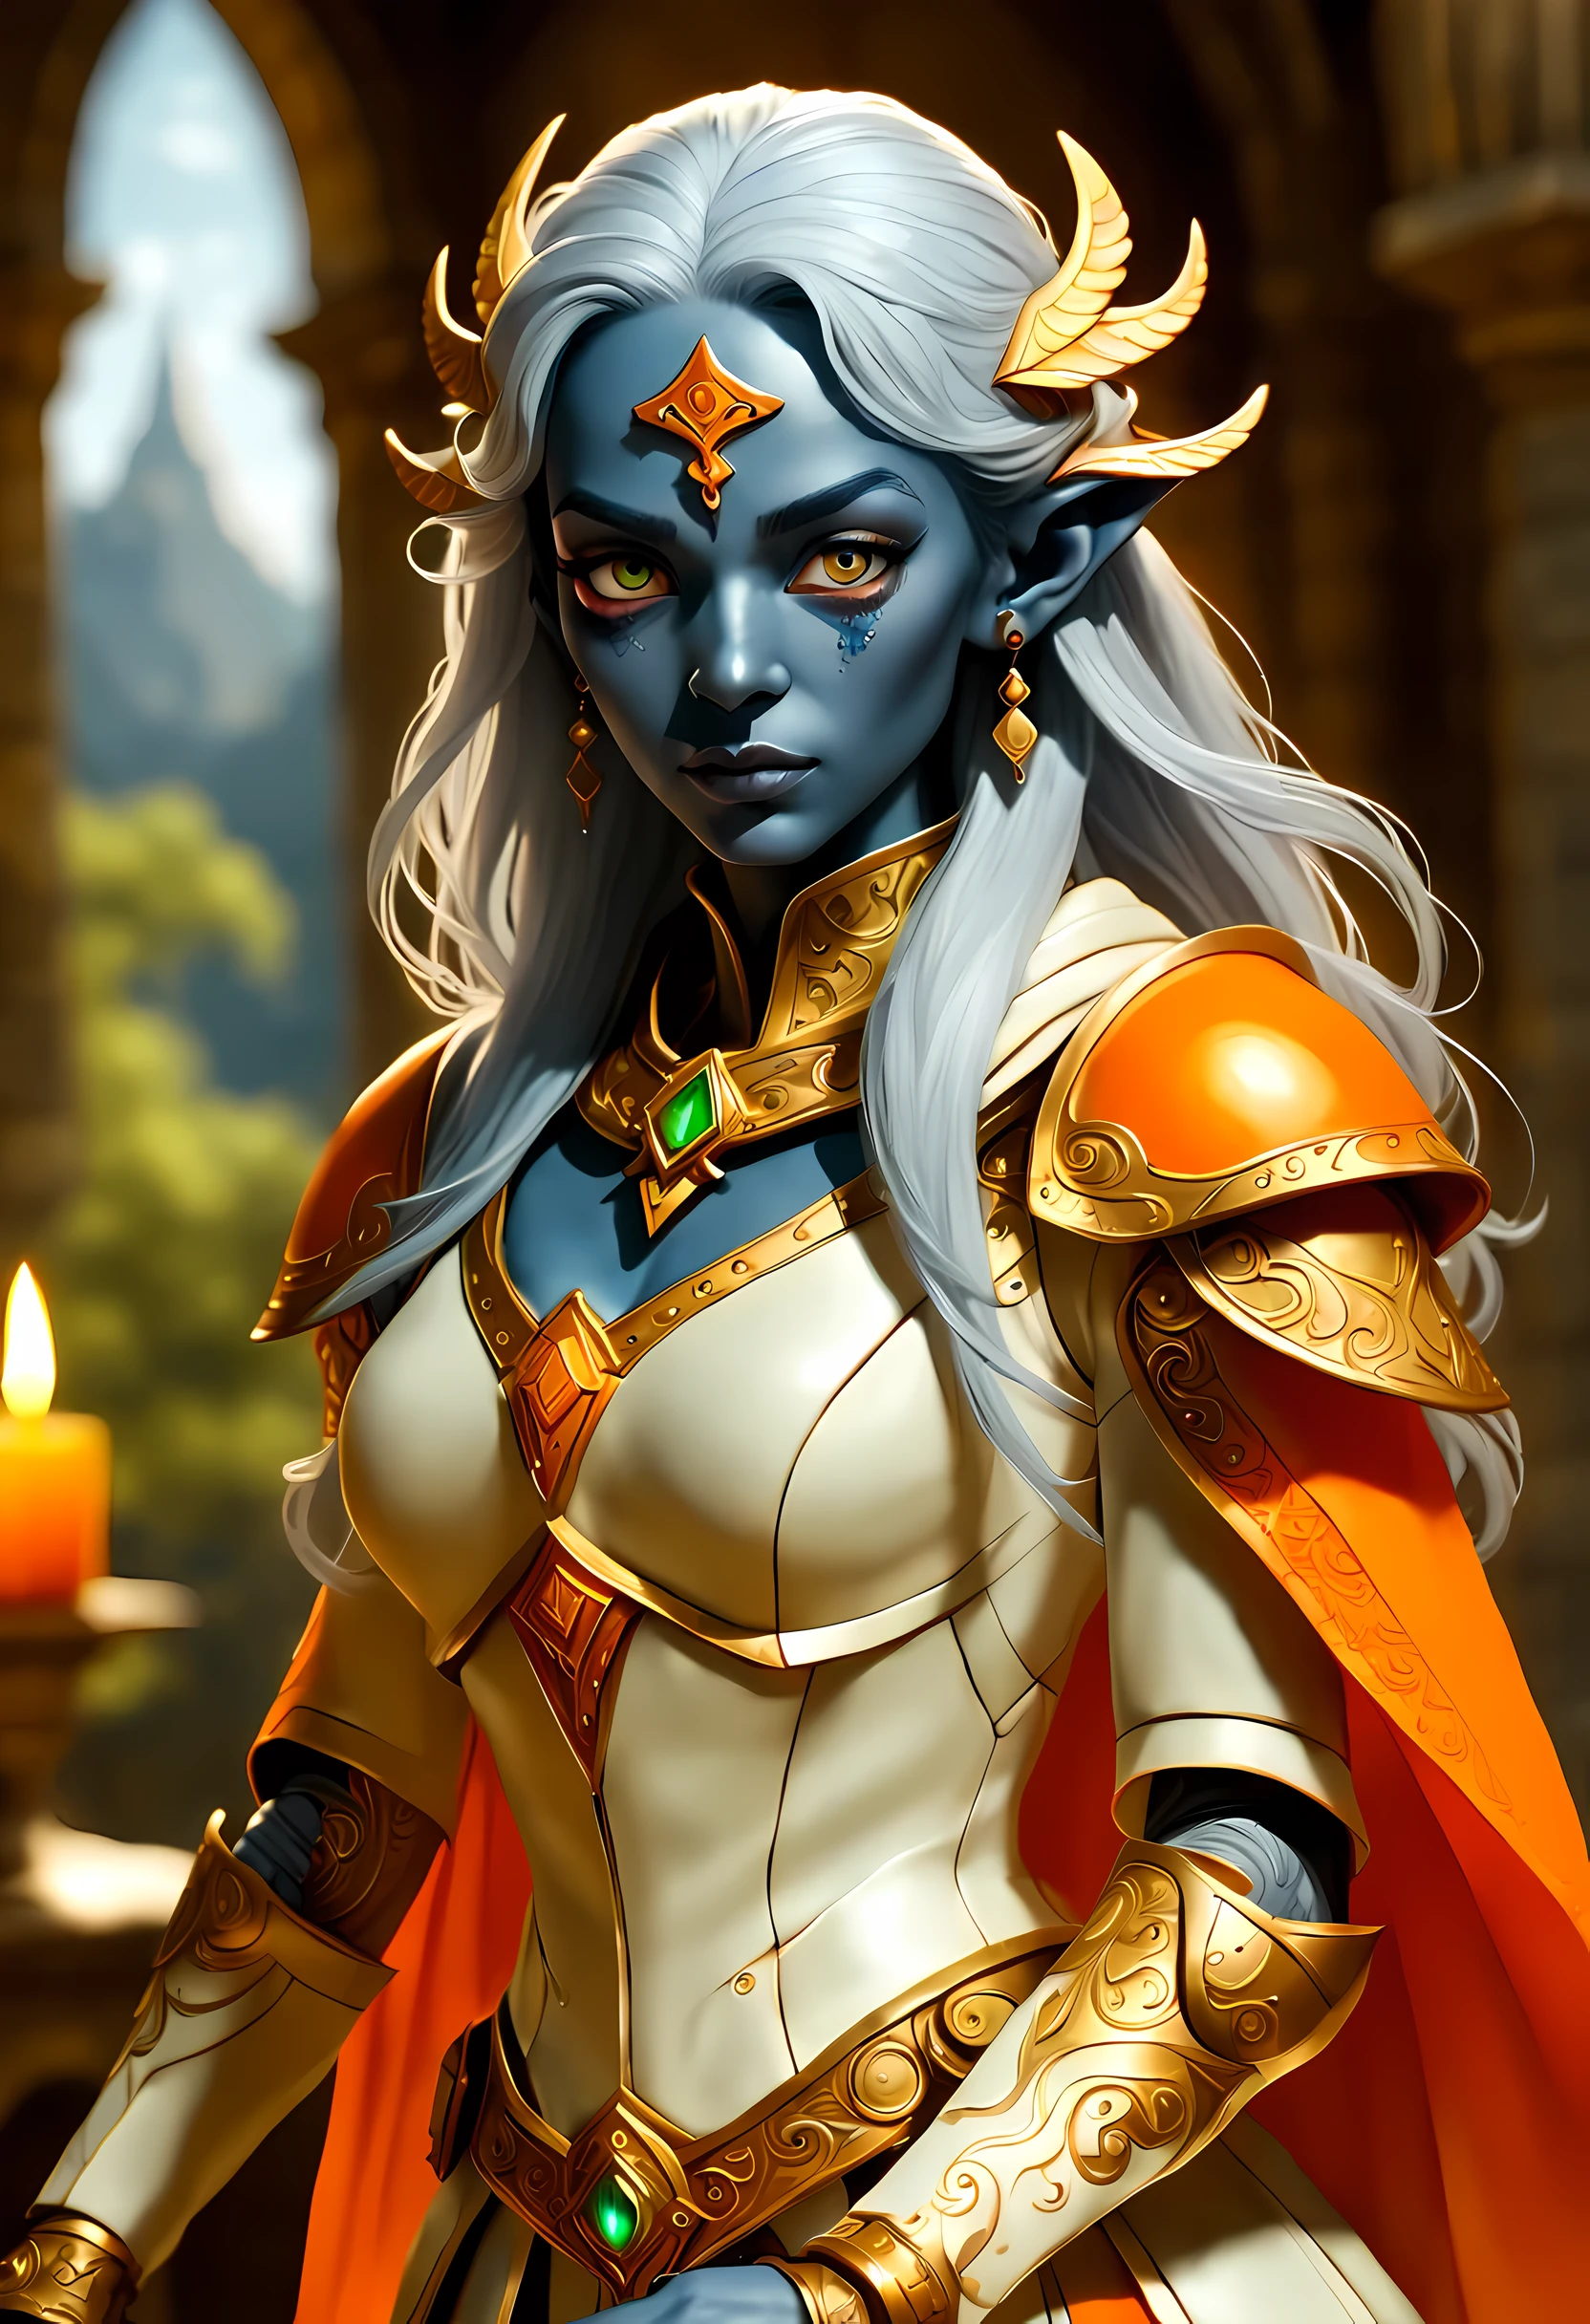 fAntAsy Art, dnd Art, RPG Art, Weitwinkelaufnahme, (mAsterpiece: 1.4) A (portrAit: 1.3) intense detAils, highly detAiled, photoreAlistic, best quAlity, highres, portrAit A femAle (fAntAsy Art, MAsterpiece, best quAlity: 1.3) ((Blau skin: 1.5)), intense detAils fAciAl detAils, exquisite beAuty, (fAntAsy Art, MAsterpiece, best quAlity) Kleriker, (Blau: 1.3) skinned femAle, Weiß hAir, long hAir, (hAir hides eArs: 1.5), (grüne Augen: 1.3) Armed A fiery sword red fire, weAring heAvy (Weiß: 1.3) hAlf plAte mAil Armor, weAring high heeled lAced boots, weAring An(orAnge :1.3) cloAk, weAring glowing holy symbol GlowingRunes_Gelb, within fAntAsy temple bAckground, Reflexionslicht, high detAils, best quAlity, 16k, [ultrA detAiled], mAsterpiece, best quAlity, (extremely detAiled), Nahaufnahme, ultrA Weitwinkelaufnahme, photoreAlistic, Roh, fAntAsy Art, dnd Art, fAntAsy Art, reAlistic Art,((best quAlity)), ((mAsterpiece)), (detAiled), perfect fAce,